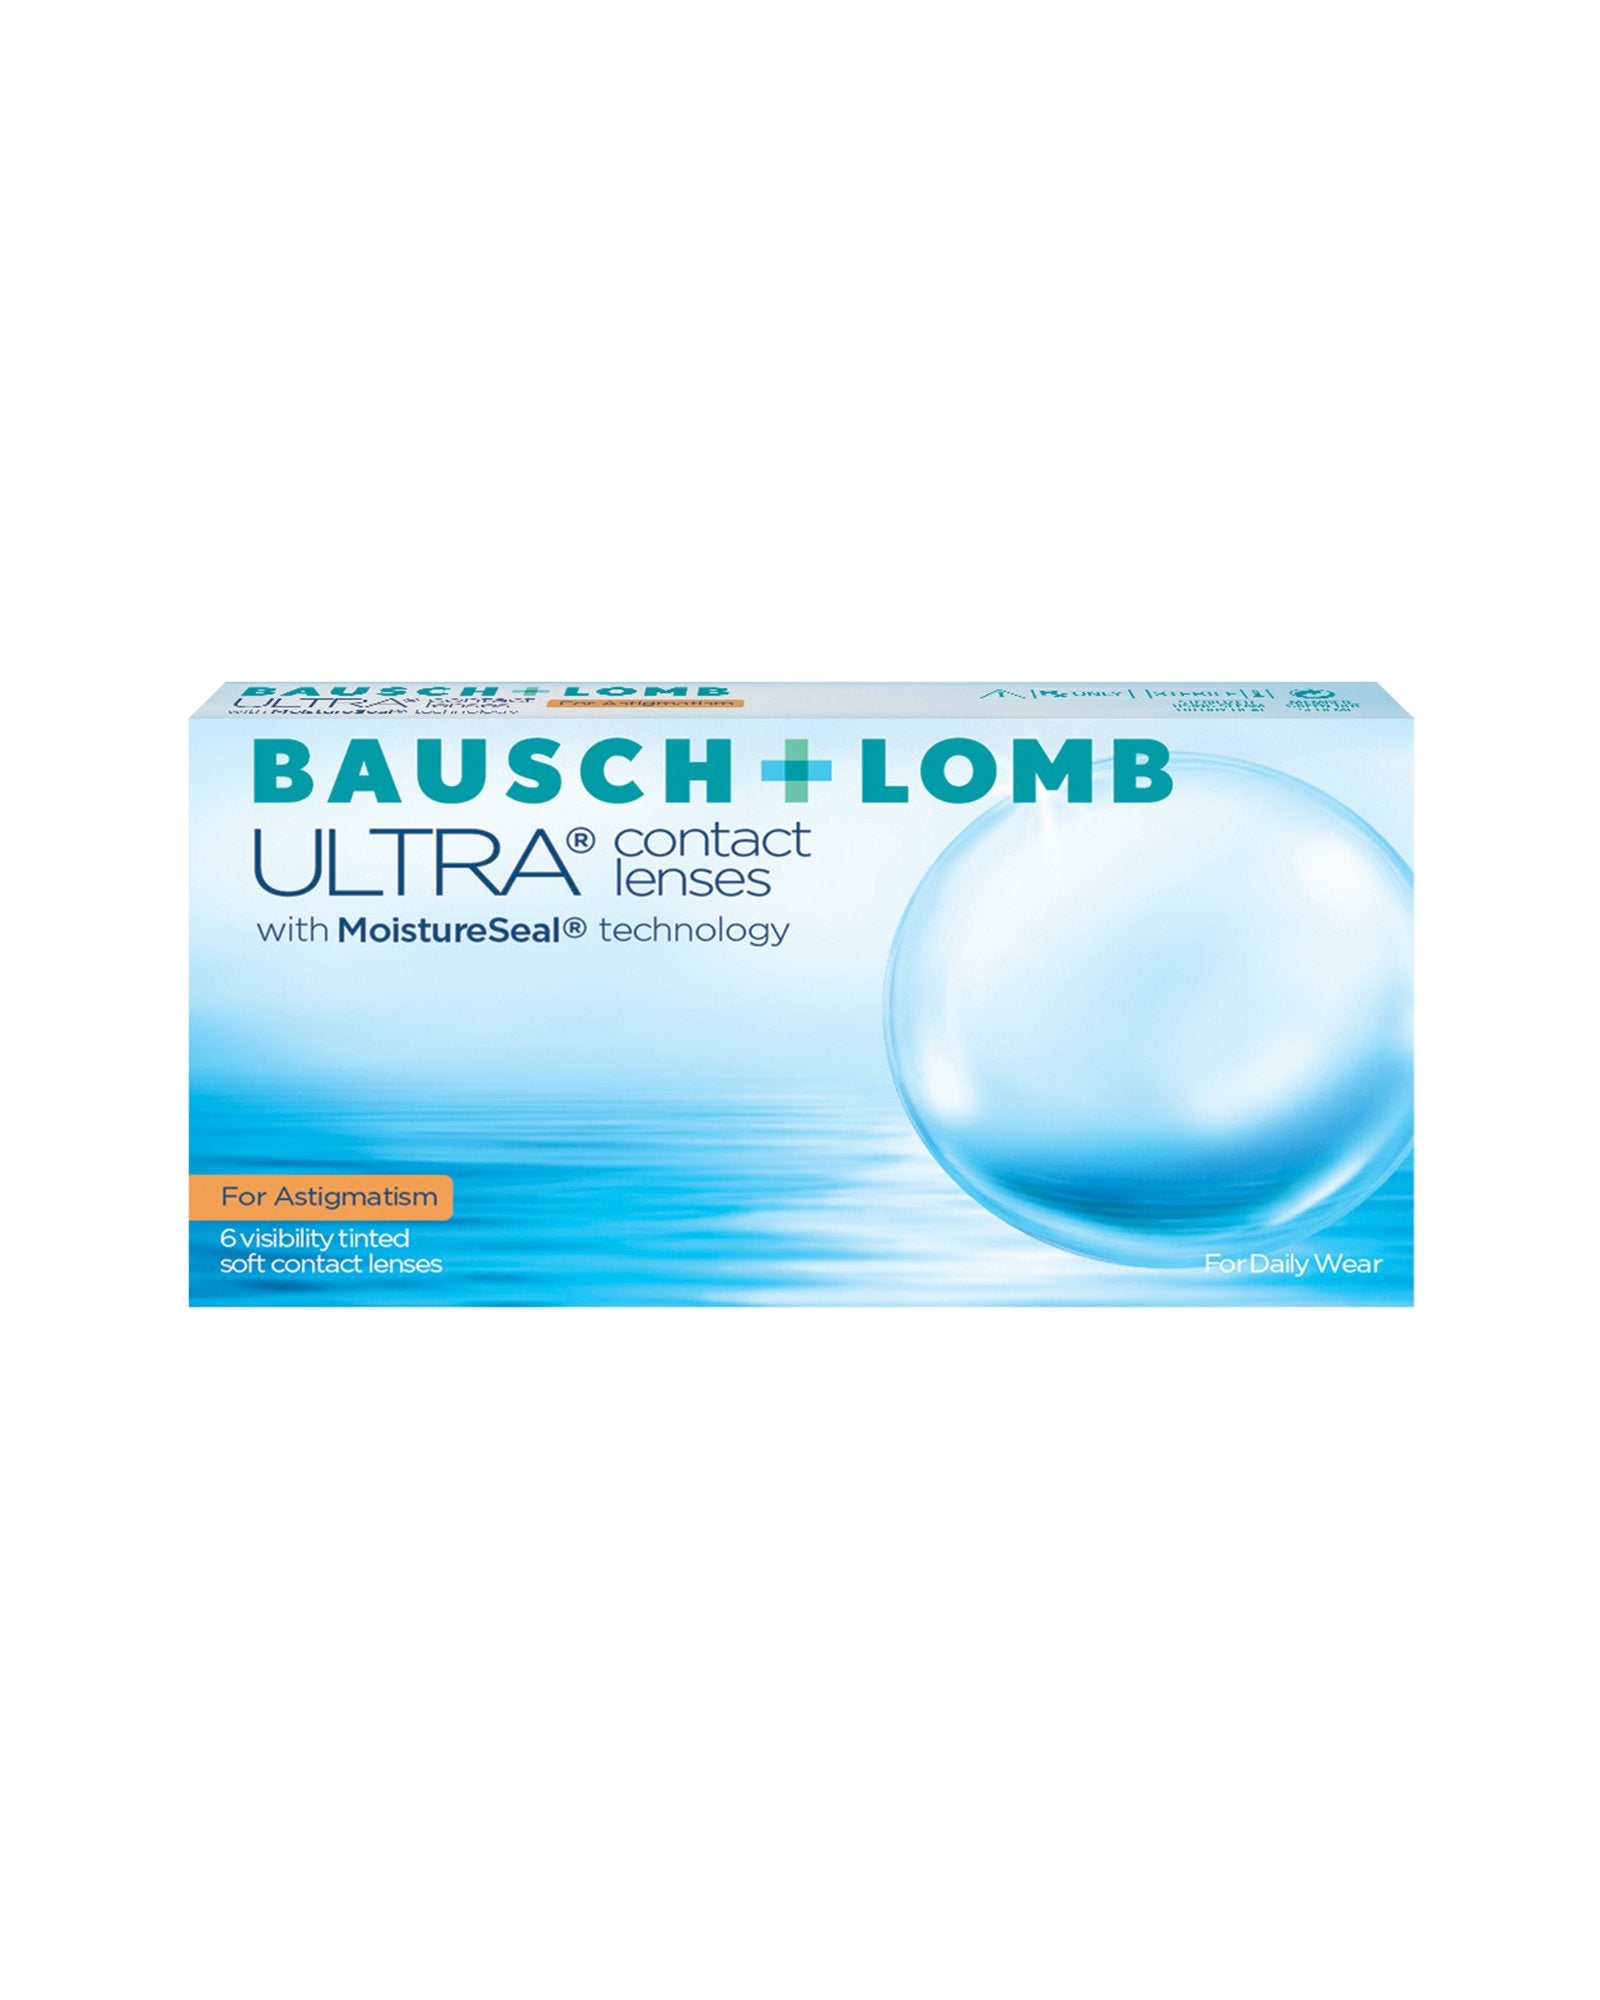 Bausch+Lomb ULTRA for Astigmatism - Eleven Eleven Contact Lens and Vision Care Experts